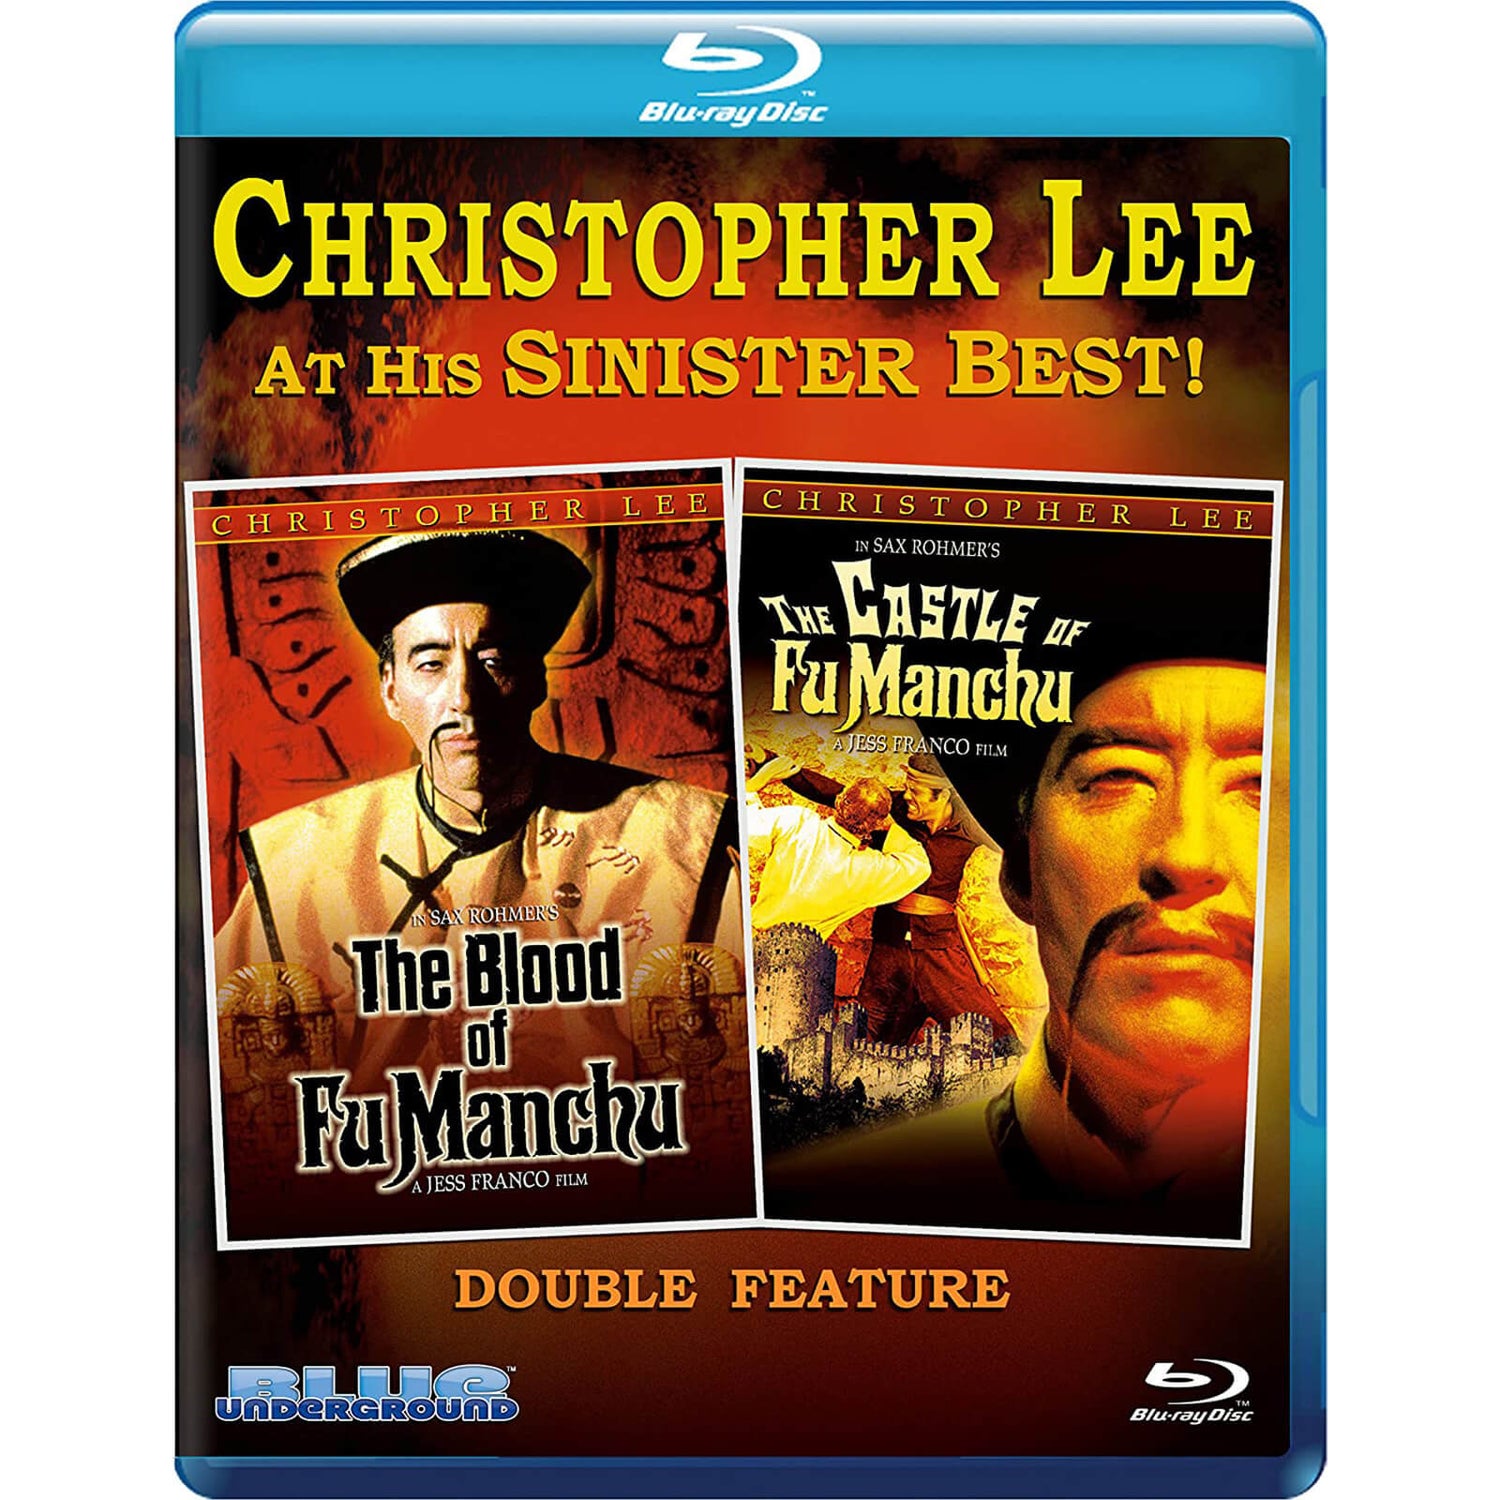 Double Feature: The Blood of Fu Manchu / The Castle of Fu Manchu